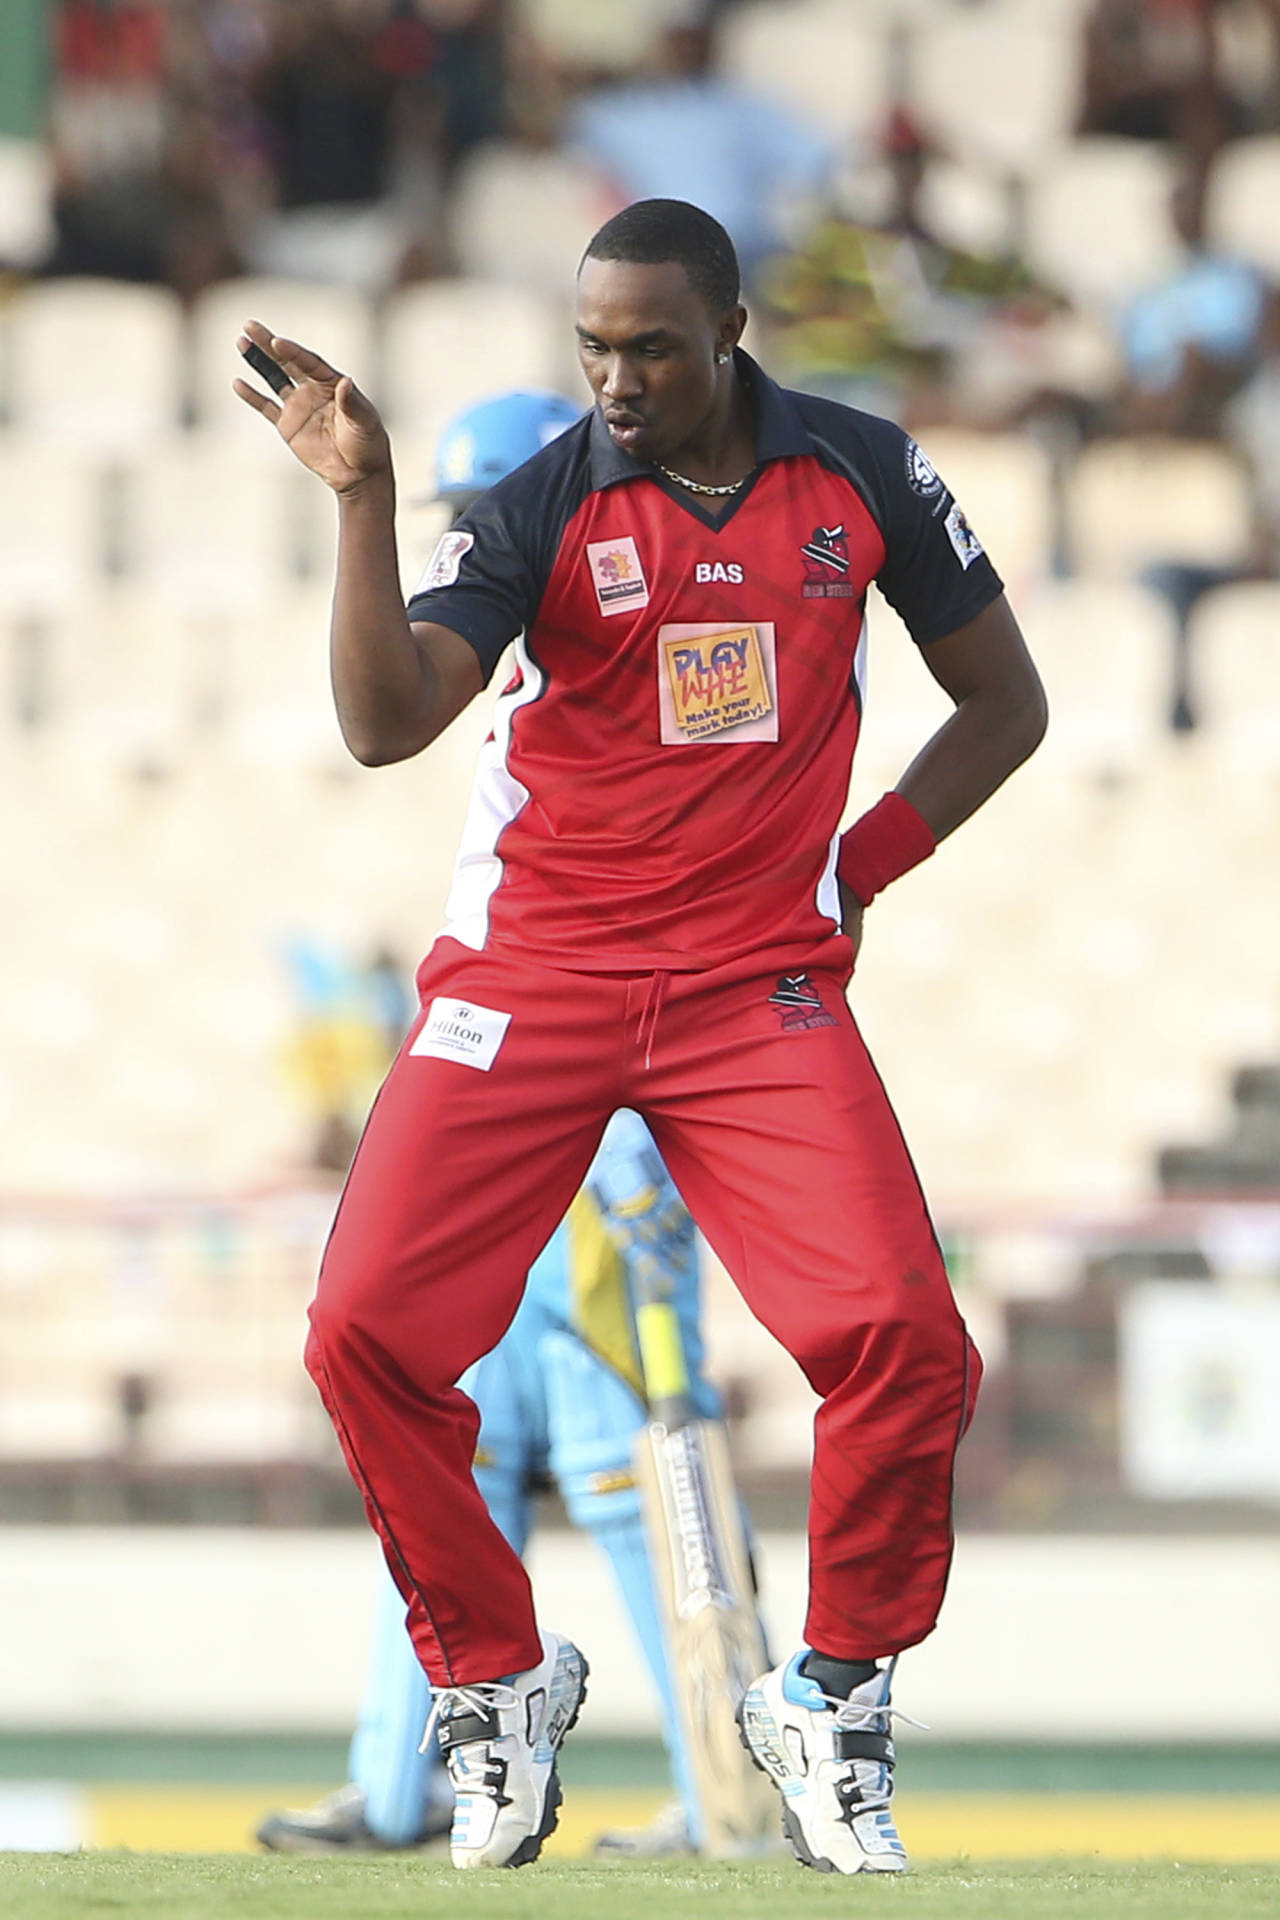 Dwayne Bravo breaks into a dance after taking a wicket, St Lucia Zouks v Trinidad & Tobago Red Steel, CPL 2014, Gros Islet, August 2, 2014